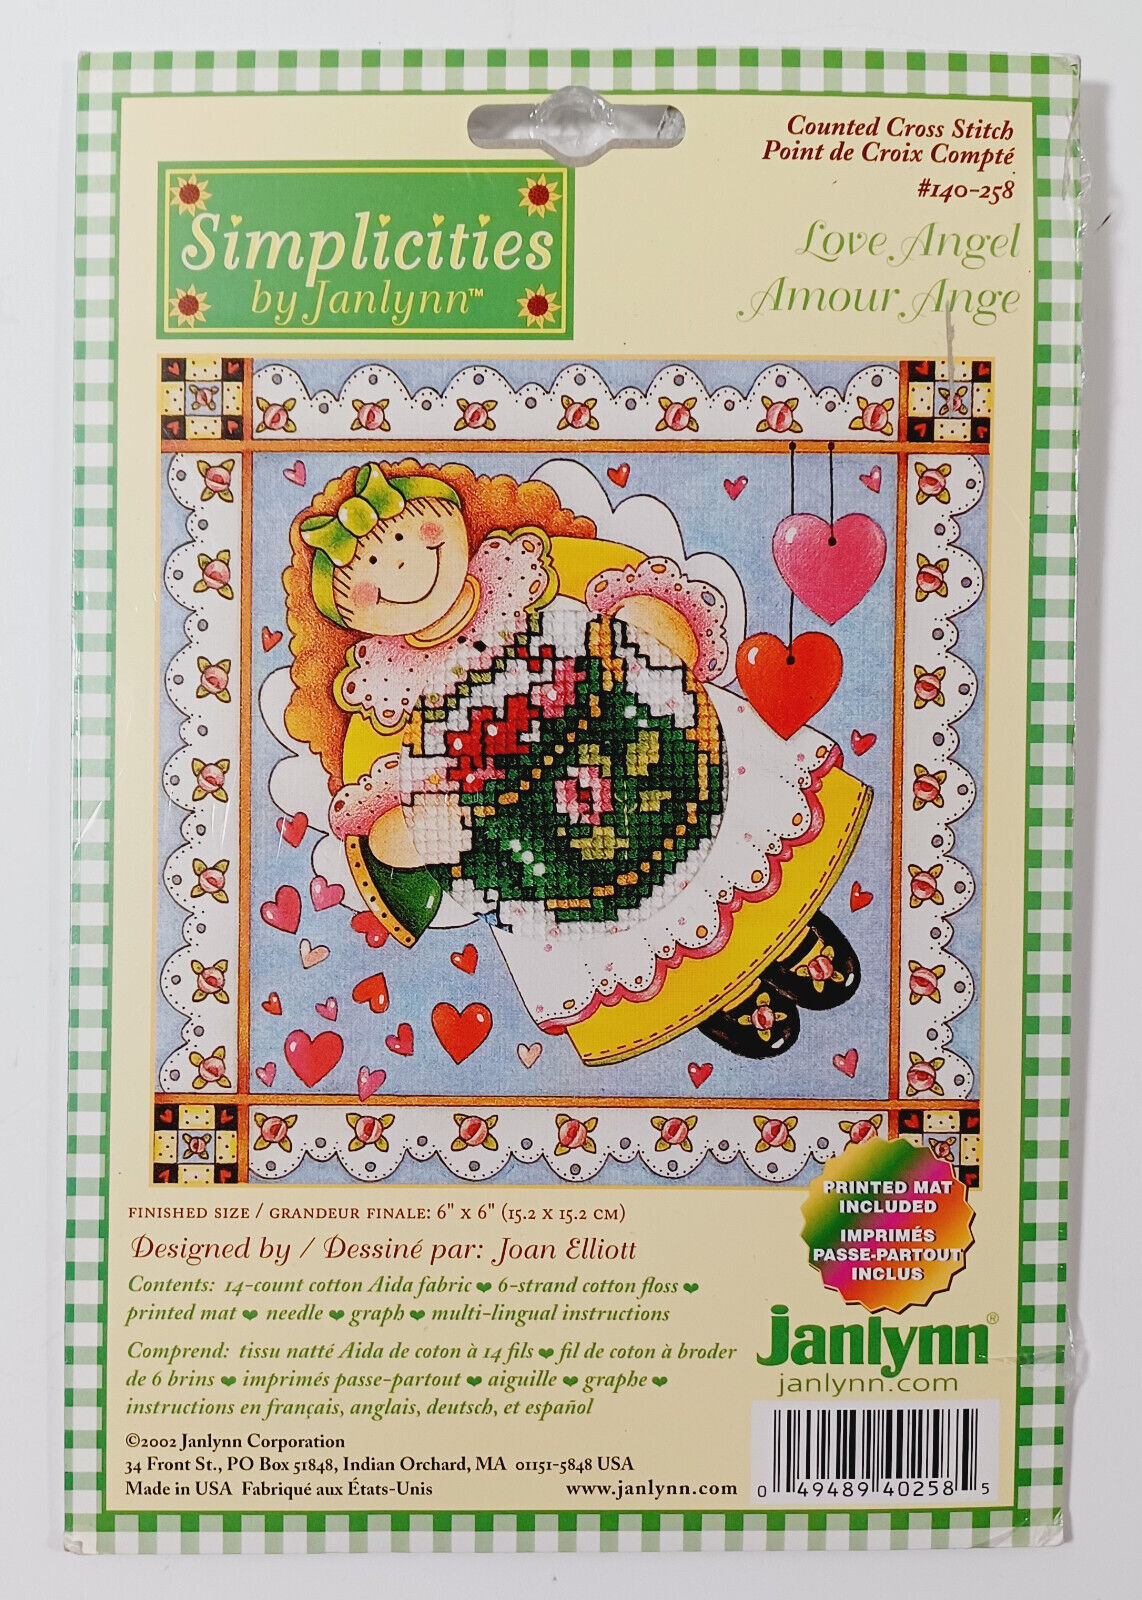 Simplicities By Janlynn #140-258 Love Angel Counted Cross Stitch Kit - NEW